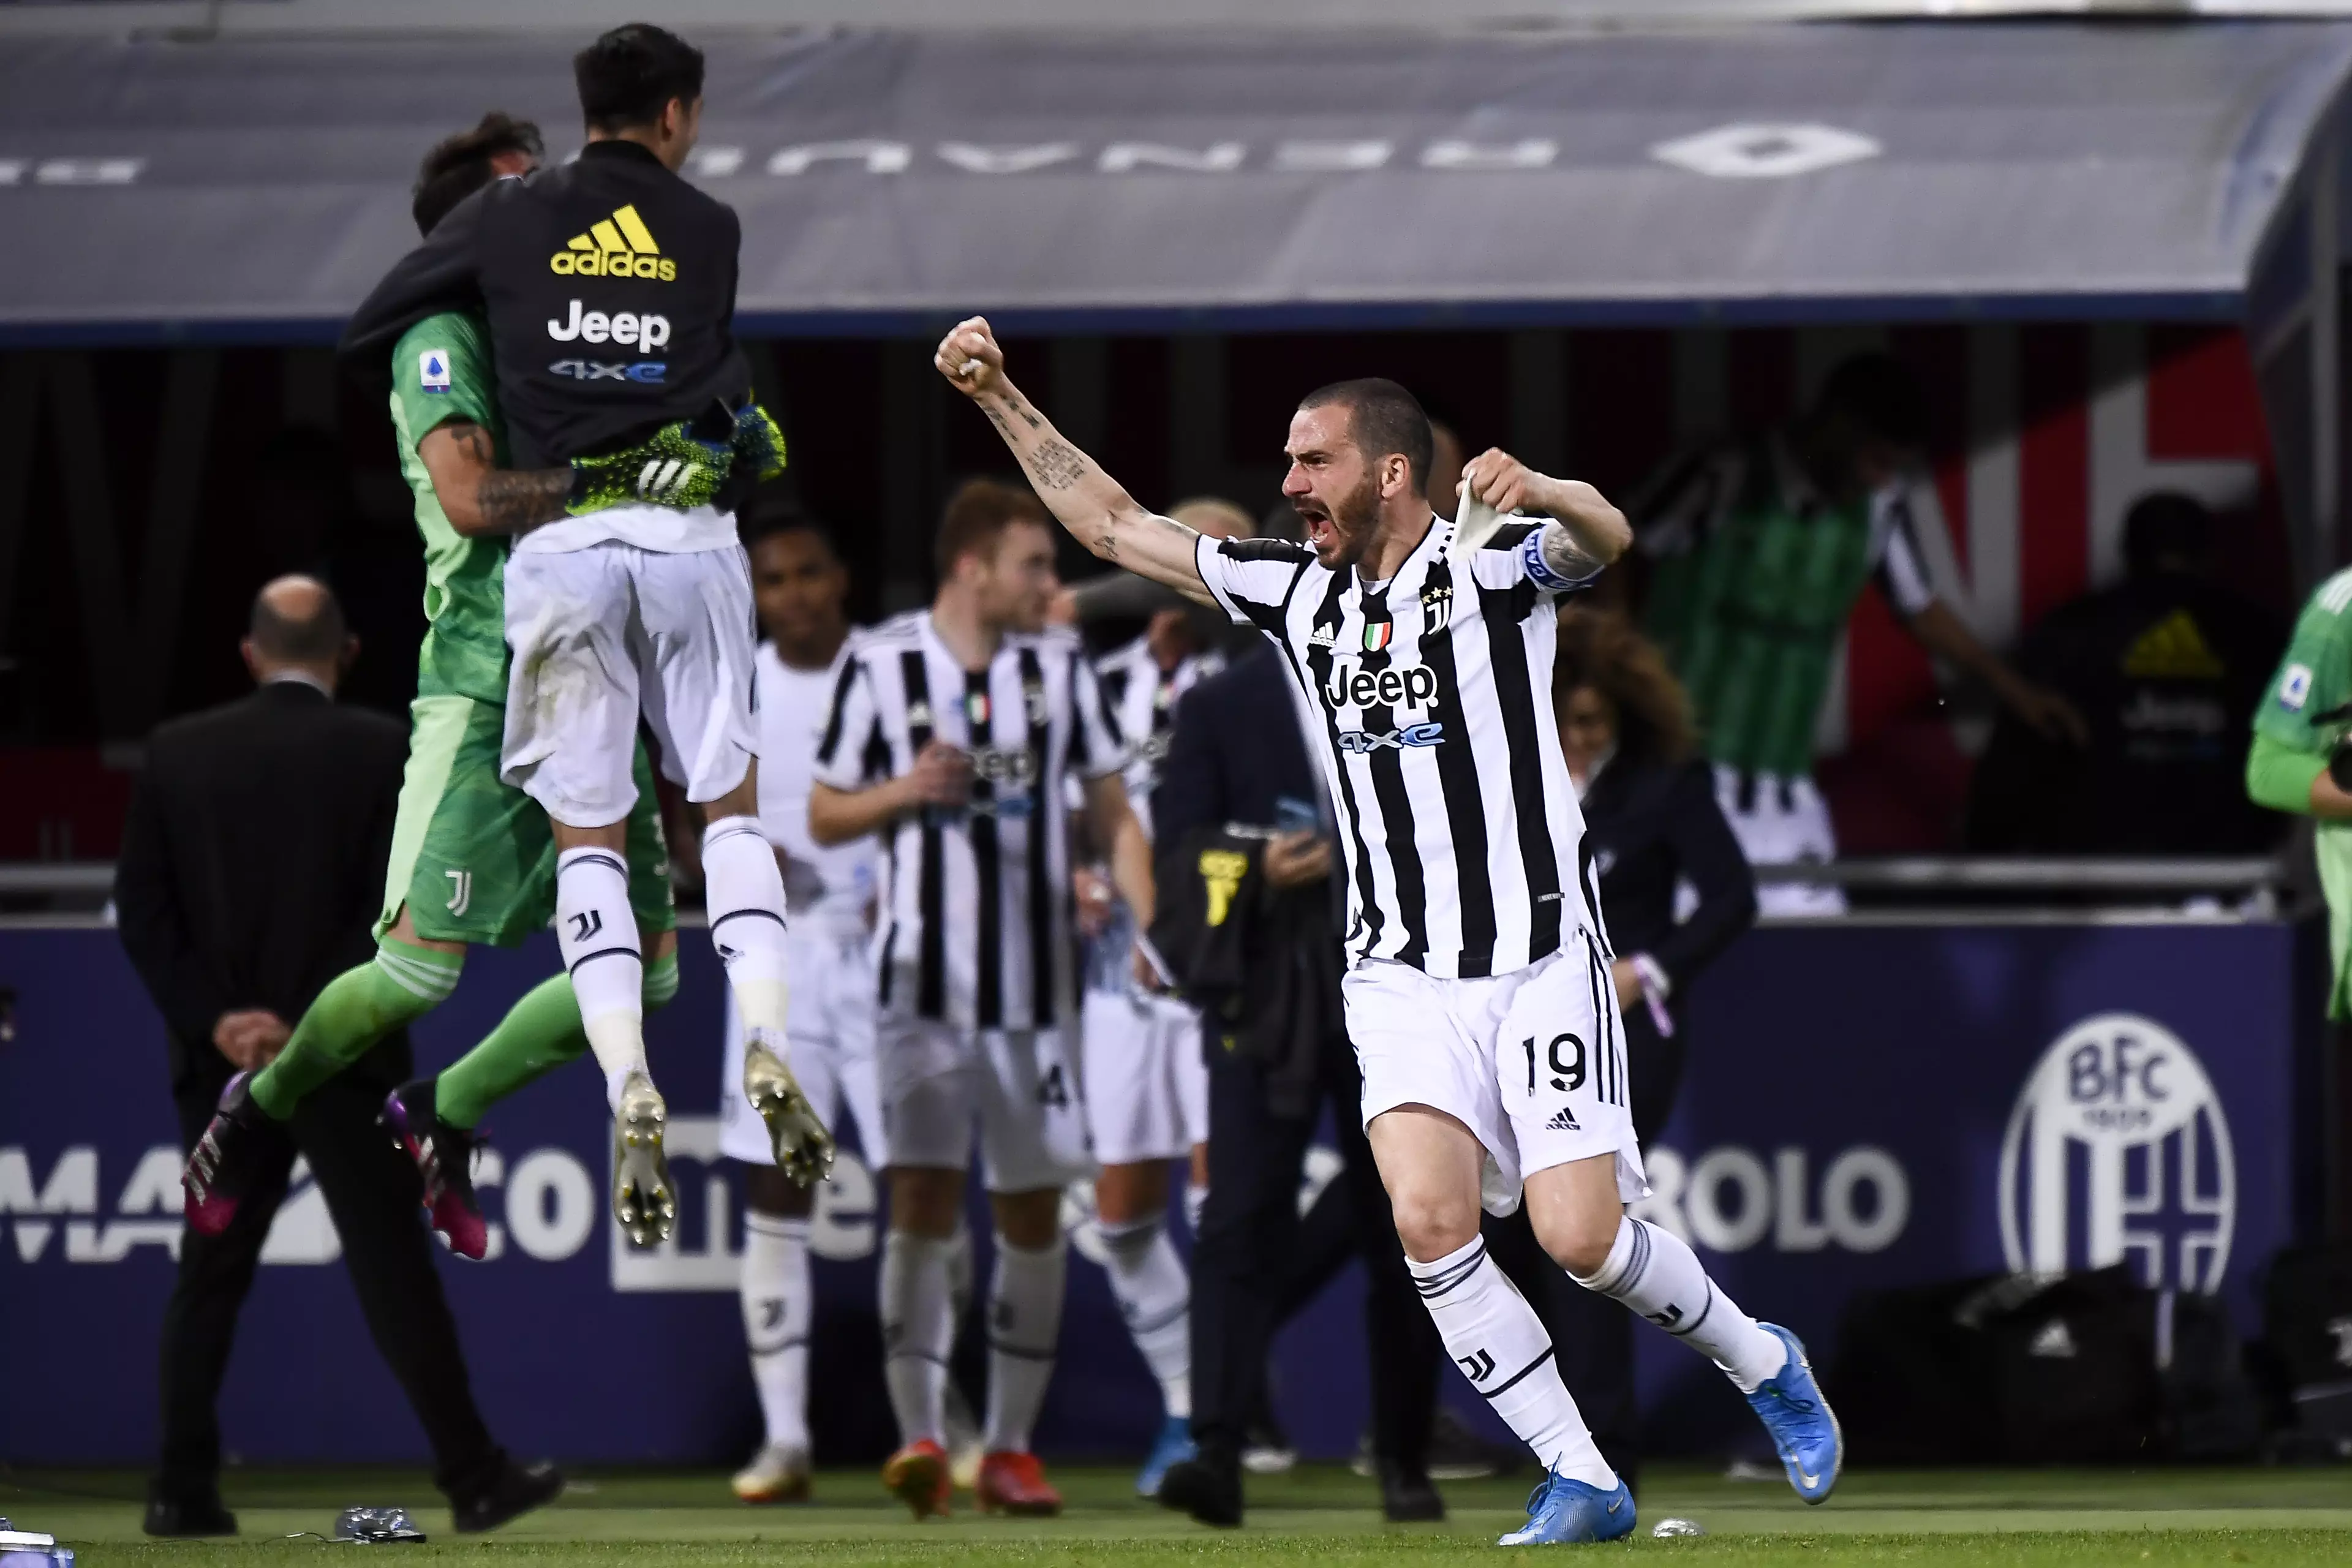 Juventus players celebrate qualifying for a competition their club no longer wanted to be a part of. Image: PA Images